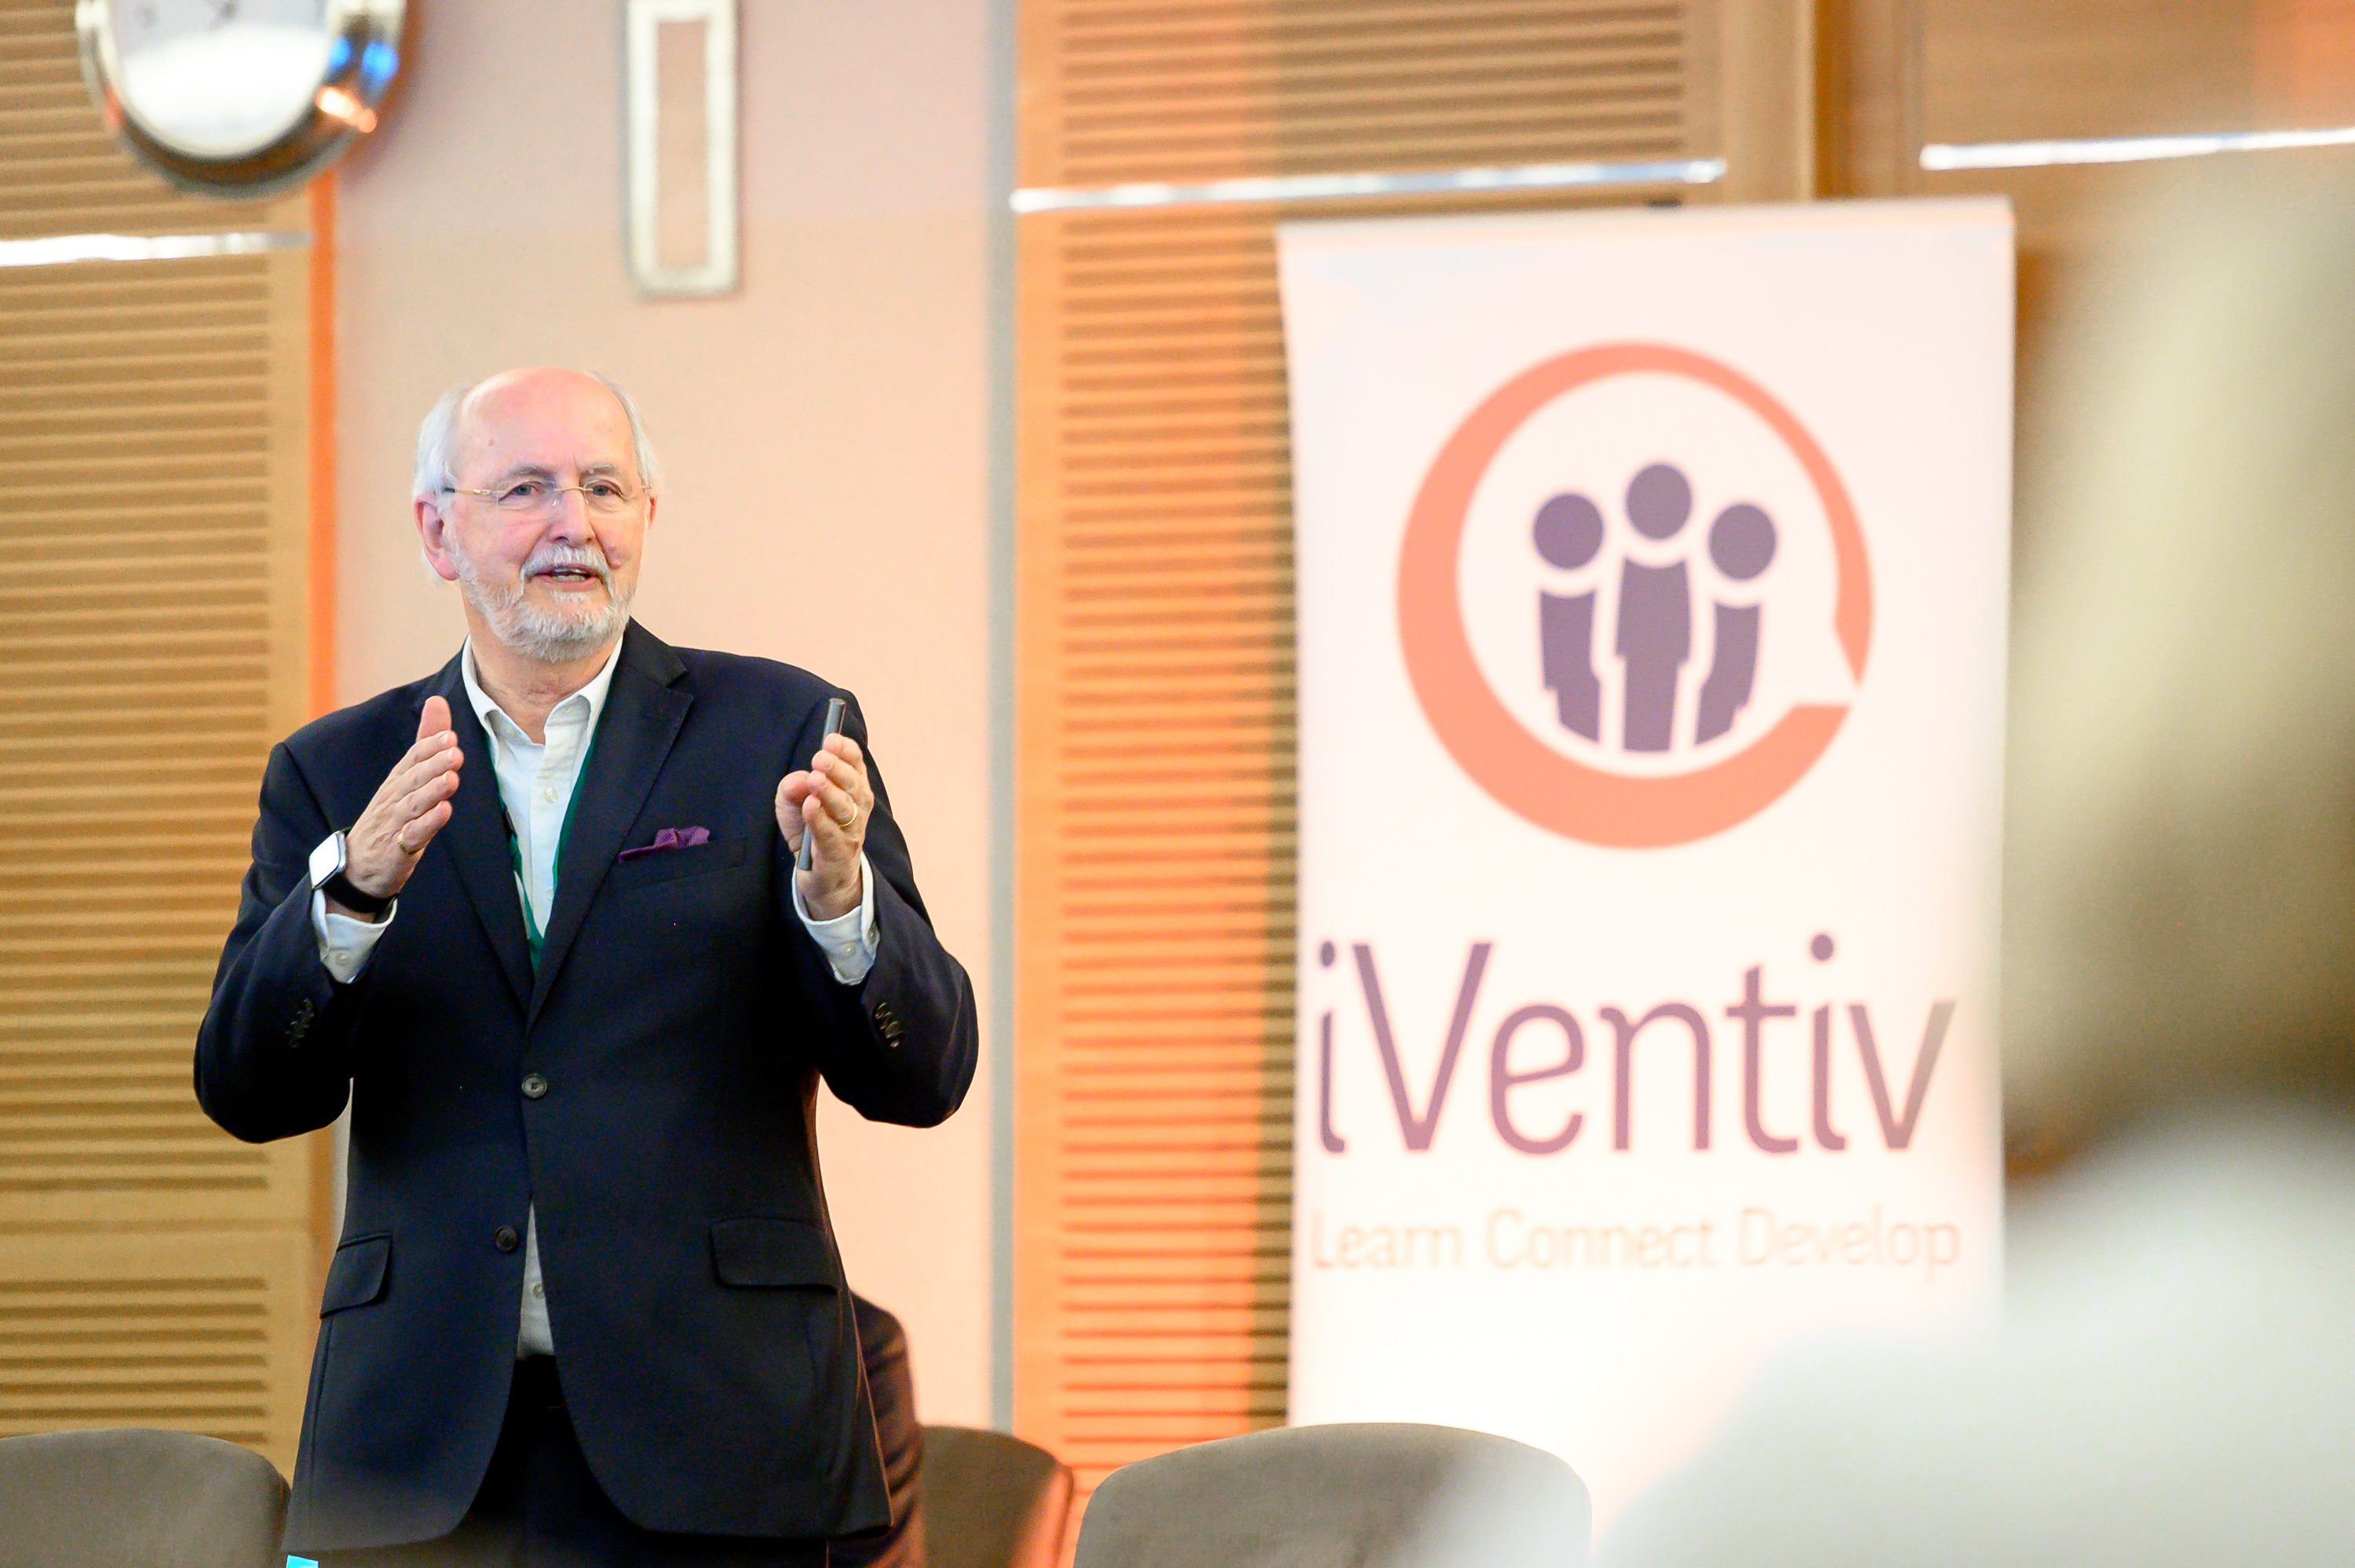 A man, charles jennings, speaks to a group of executives in front of an iventiv banner